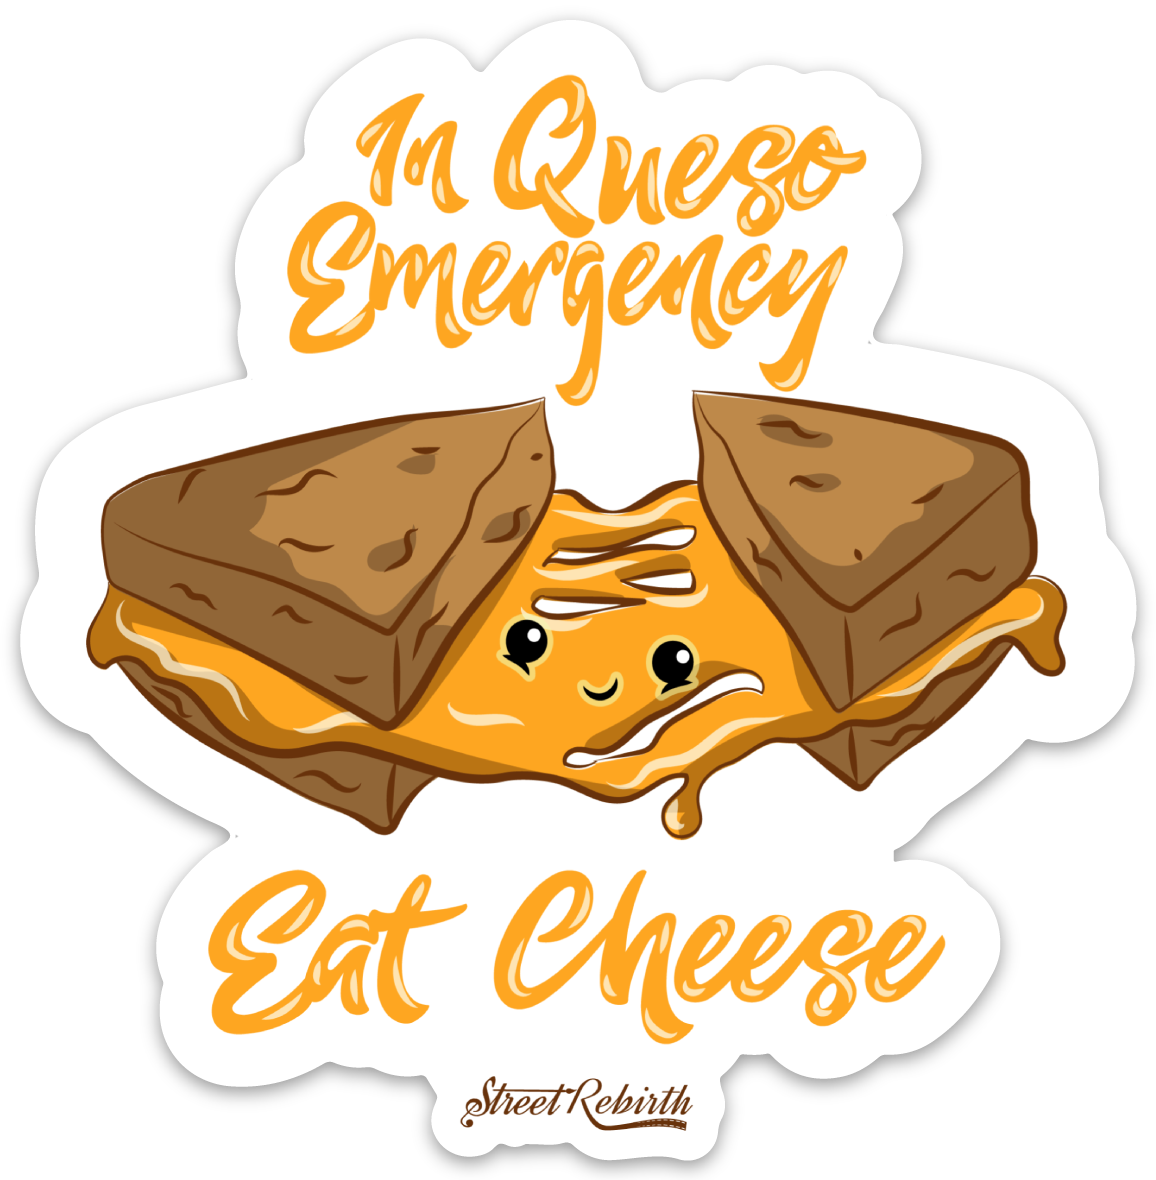 IN QUESQ EMERGENCY EAT CHEESE PUN STICKER – ONE 4 INCH WATER PROOF VINYL STICKER – FOR HYDRO FLASK, SKATEBOARD, LAPTOP, PLANNER, CAR, COLLECTING, GIFTING